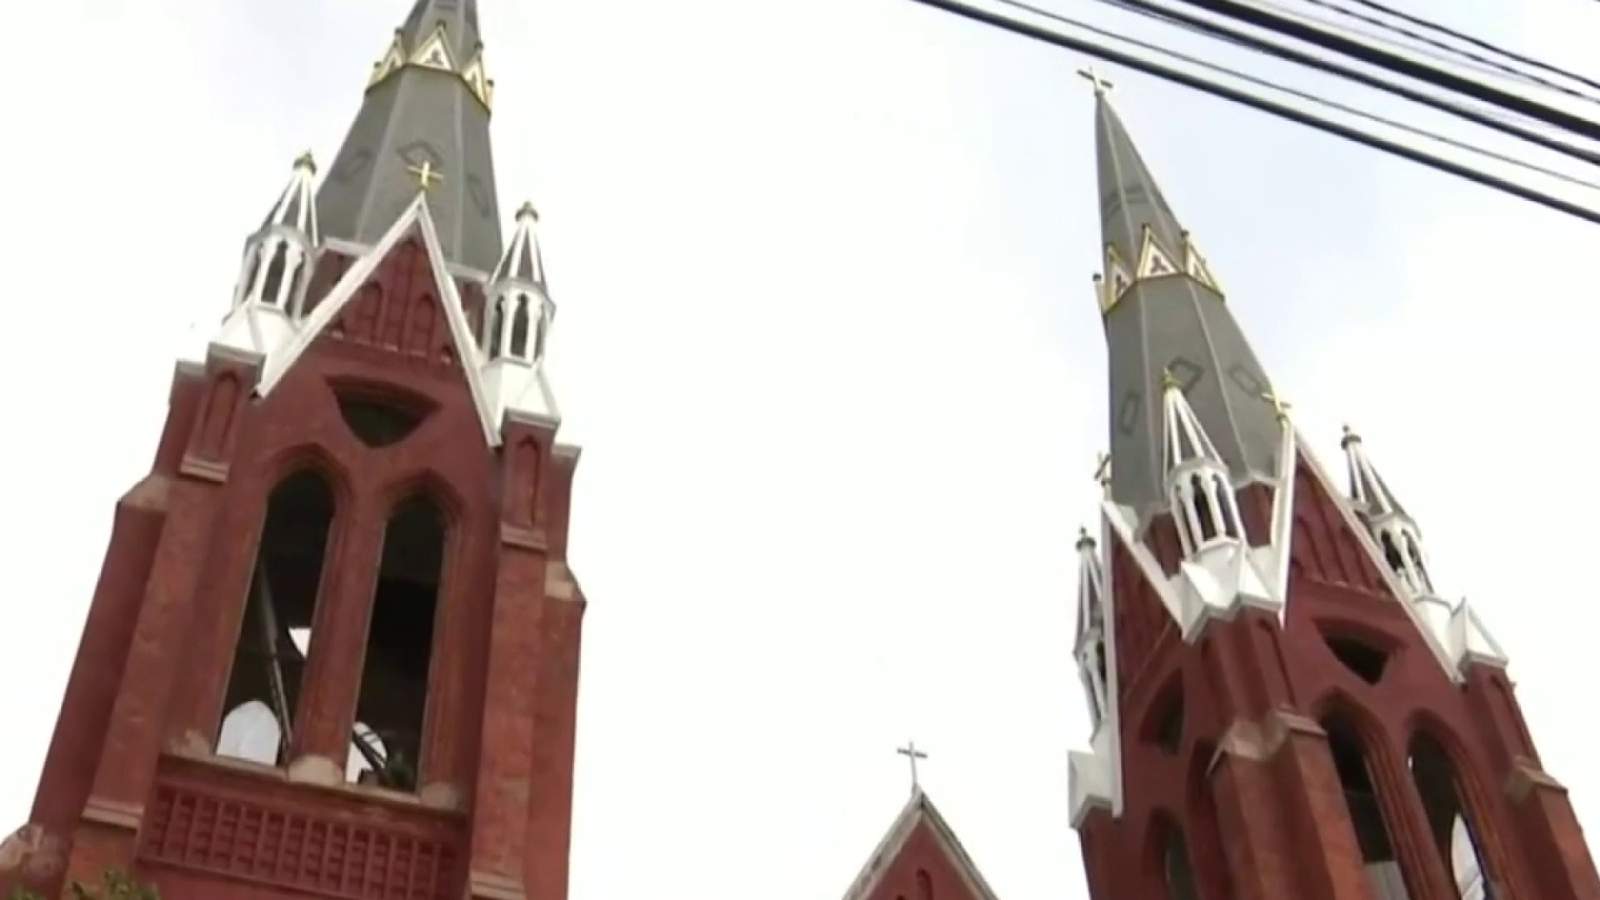 Spires atop Detroits Sweetest Heart of Mary Church restored